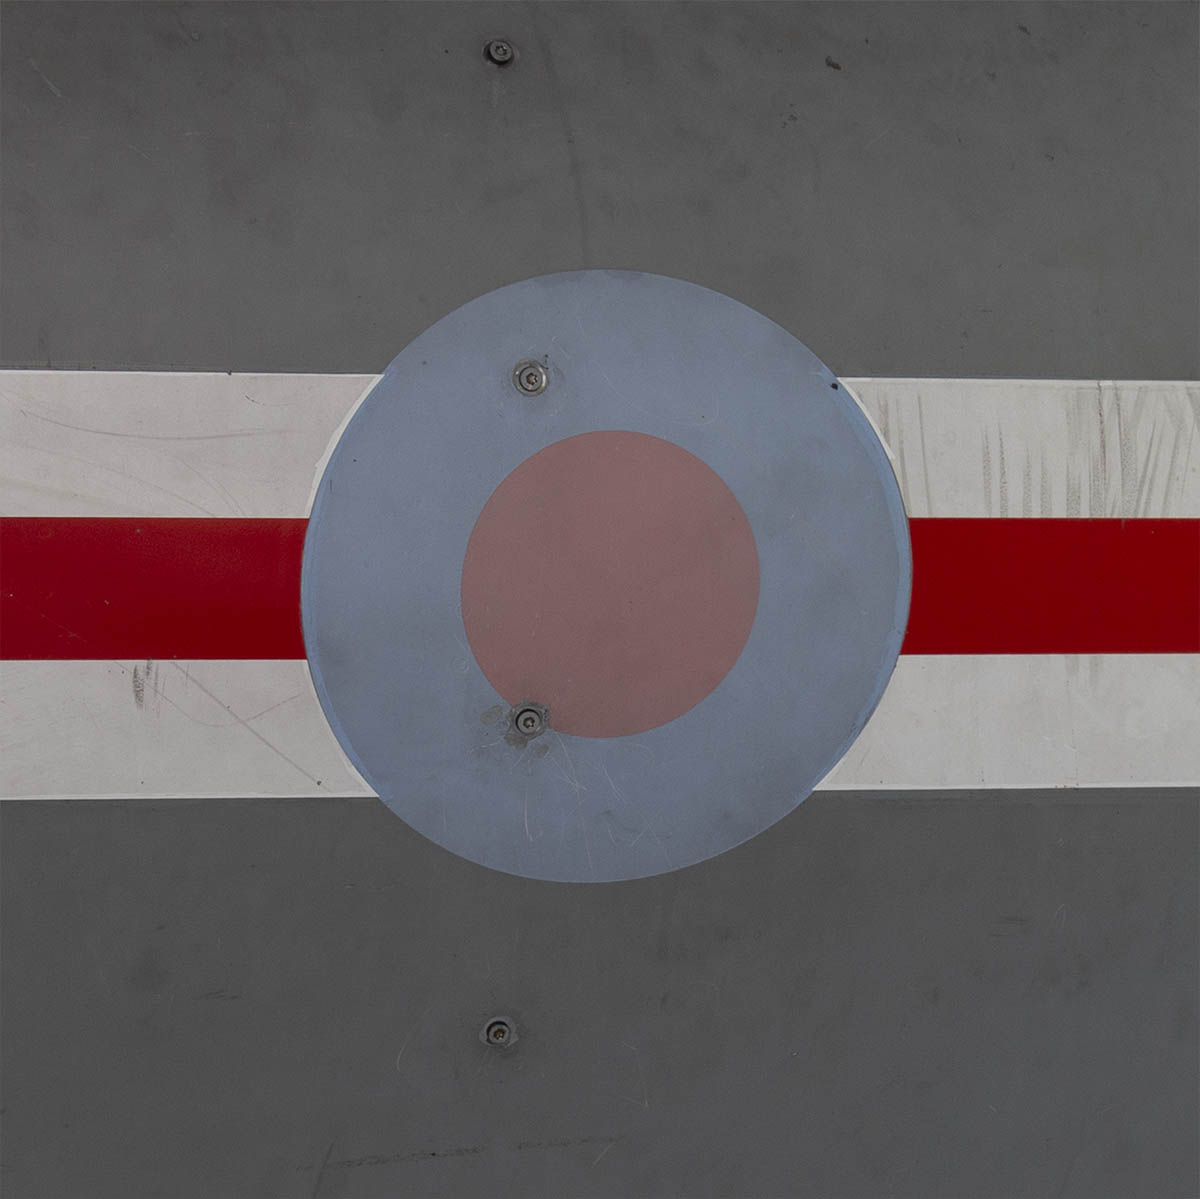 Close-up of a Eurofighter Typhoon access panel.